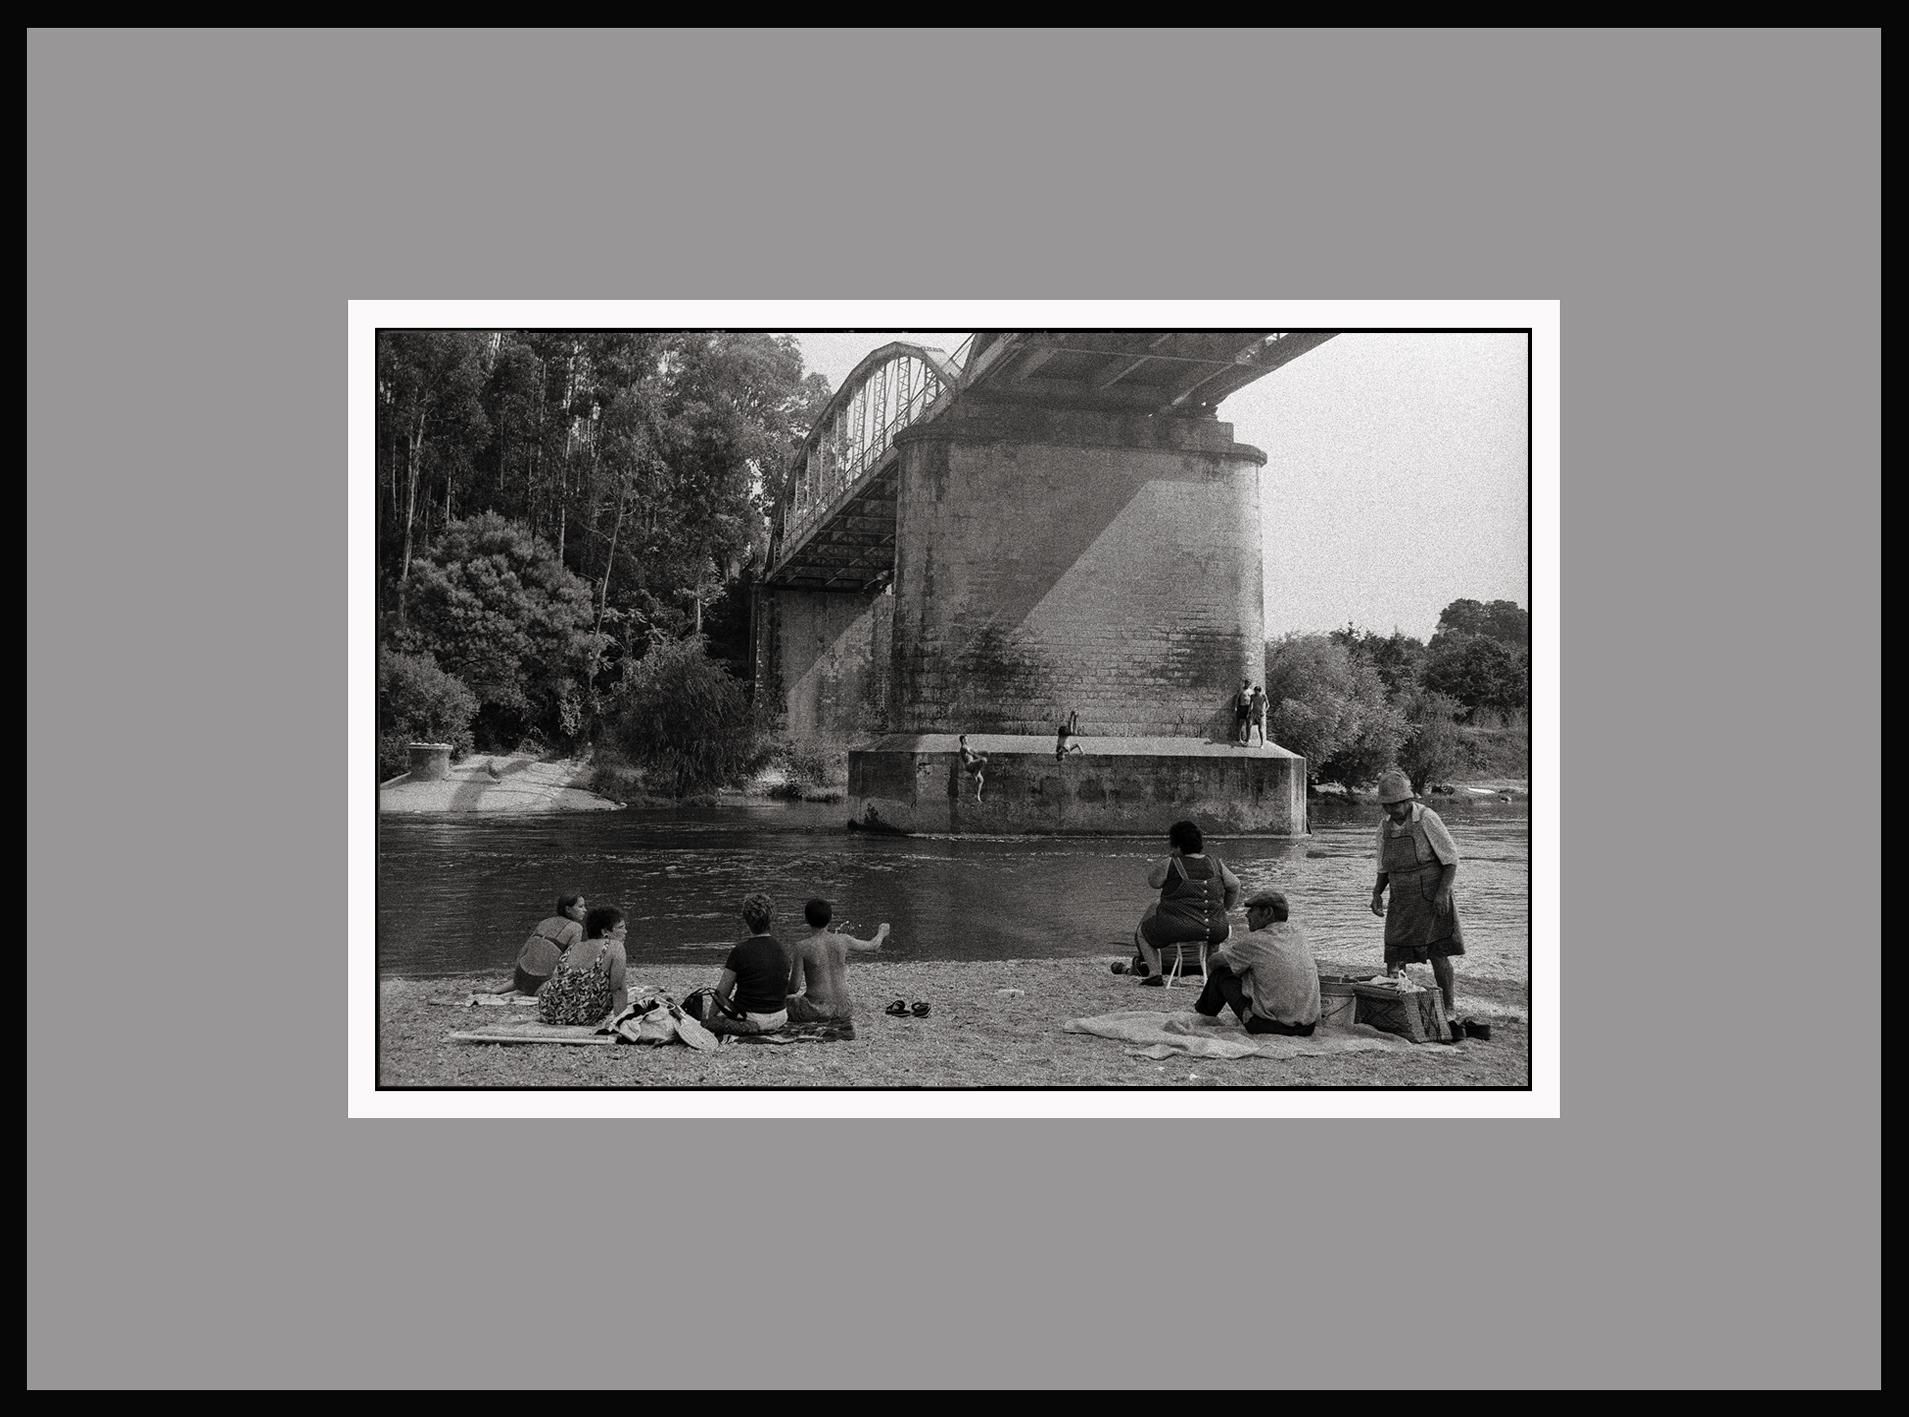 River Jumping - Portugal 2000 - Gelatin Silver Print - Signed - Black Black and White Photograph by Ana Maria Cortesão